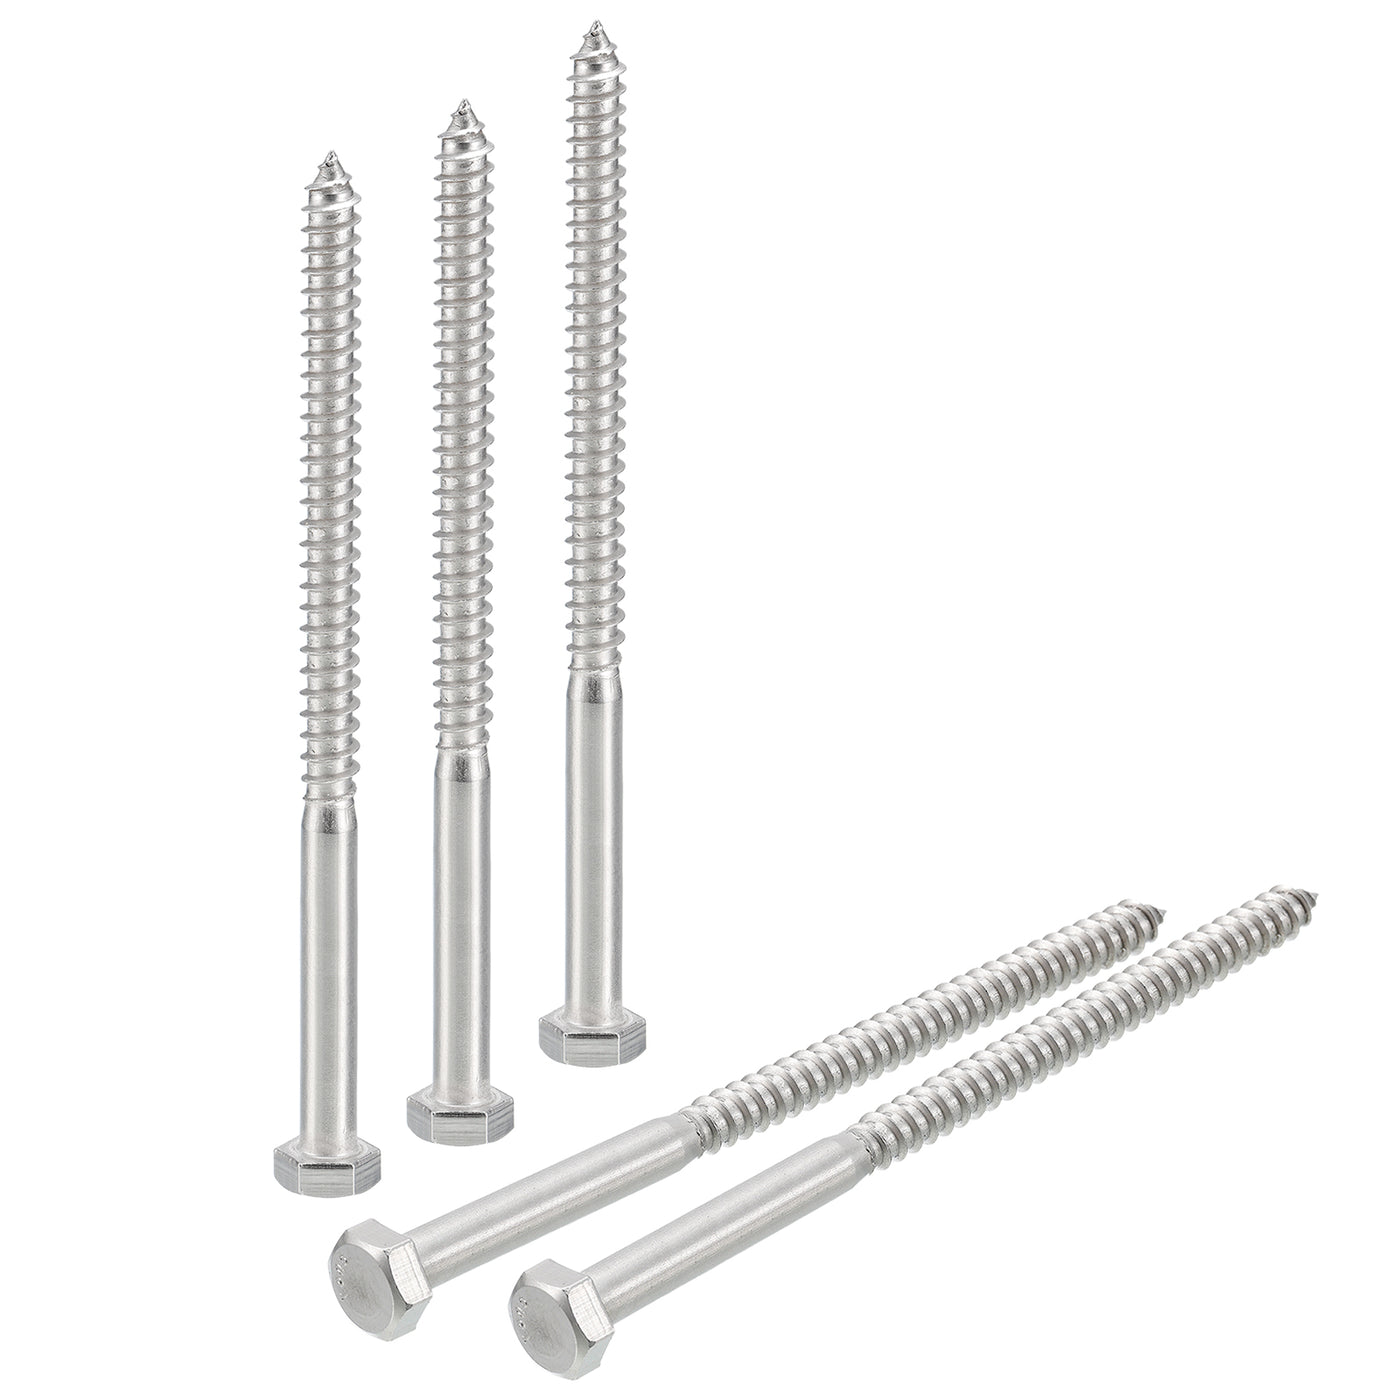 uxcell Uxcell Hex Head Lag Screws Bolts, 20pcs 5/16" x 5" 304 Stainless Steel Wood Screws